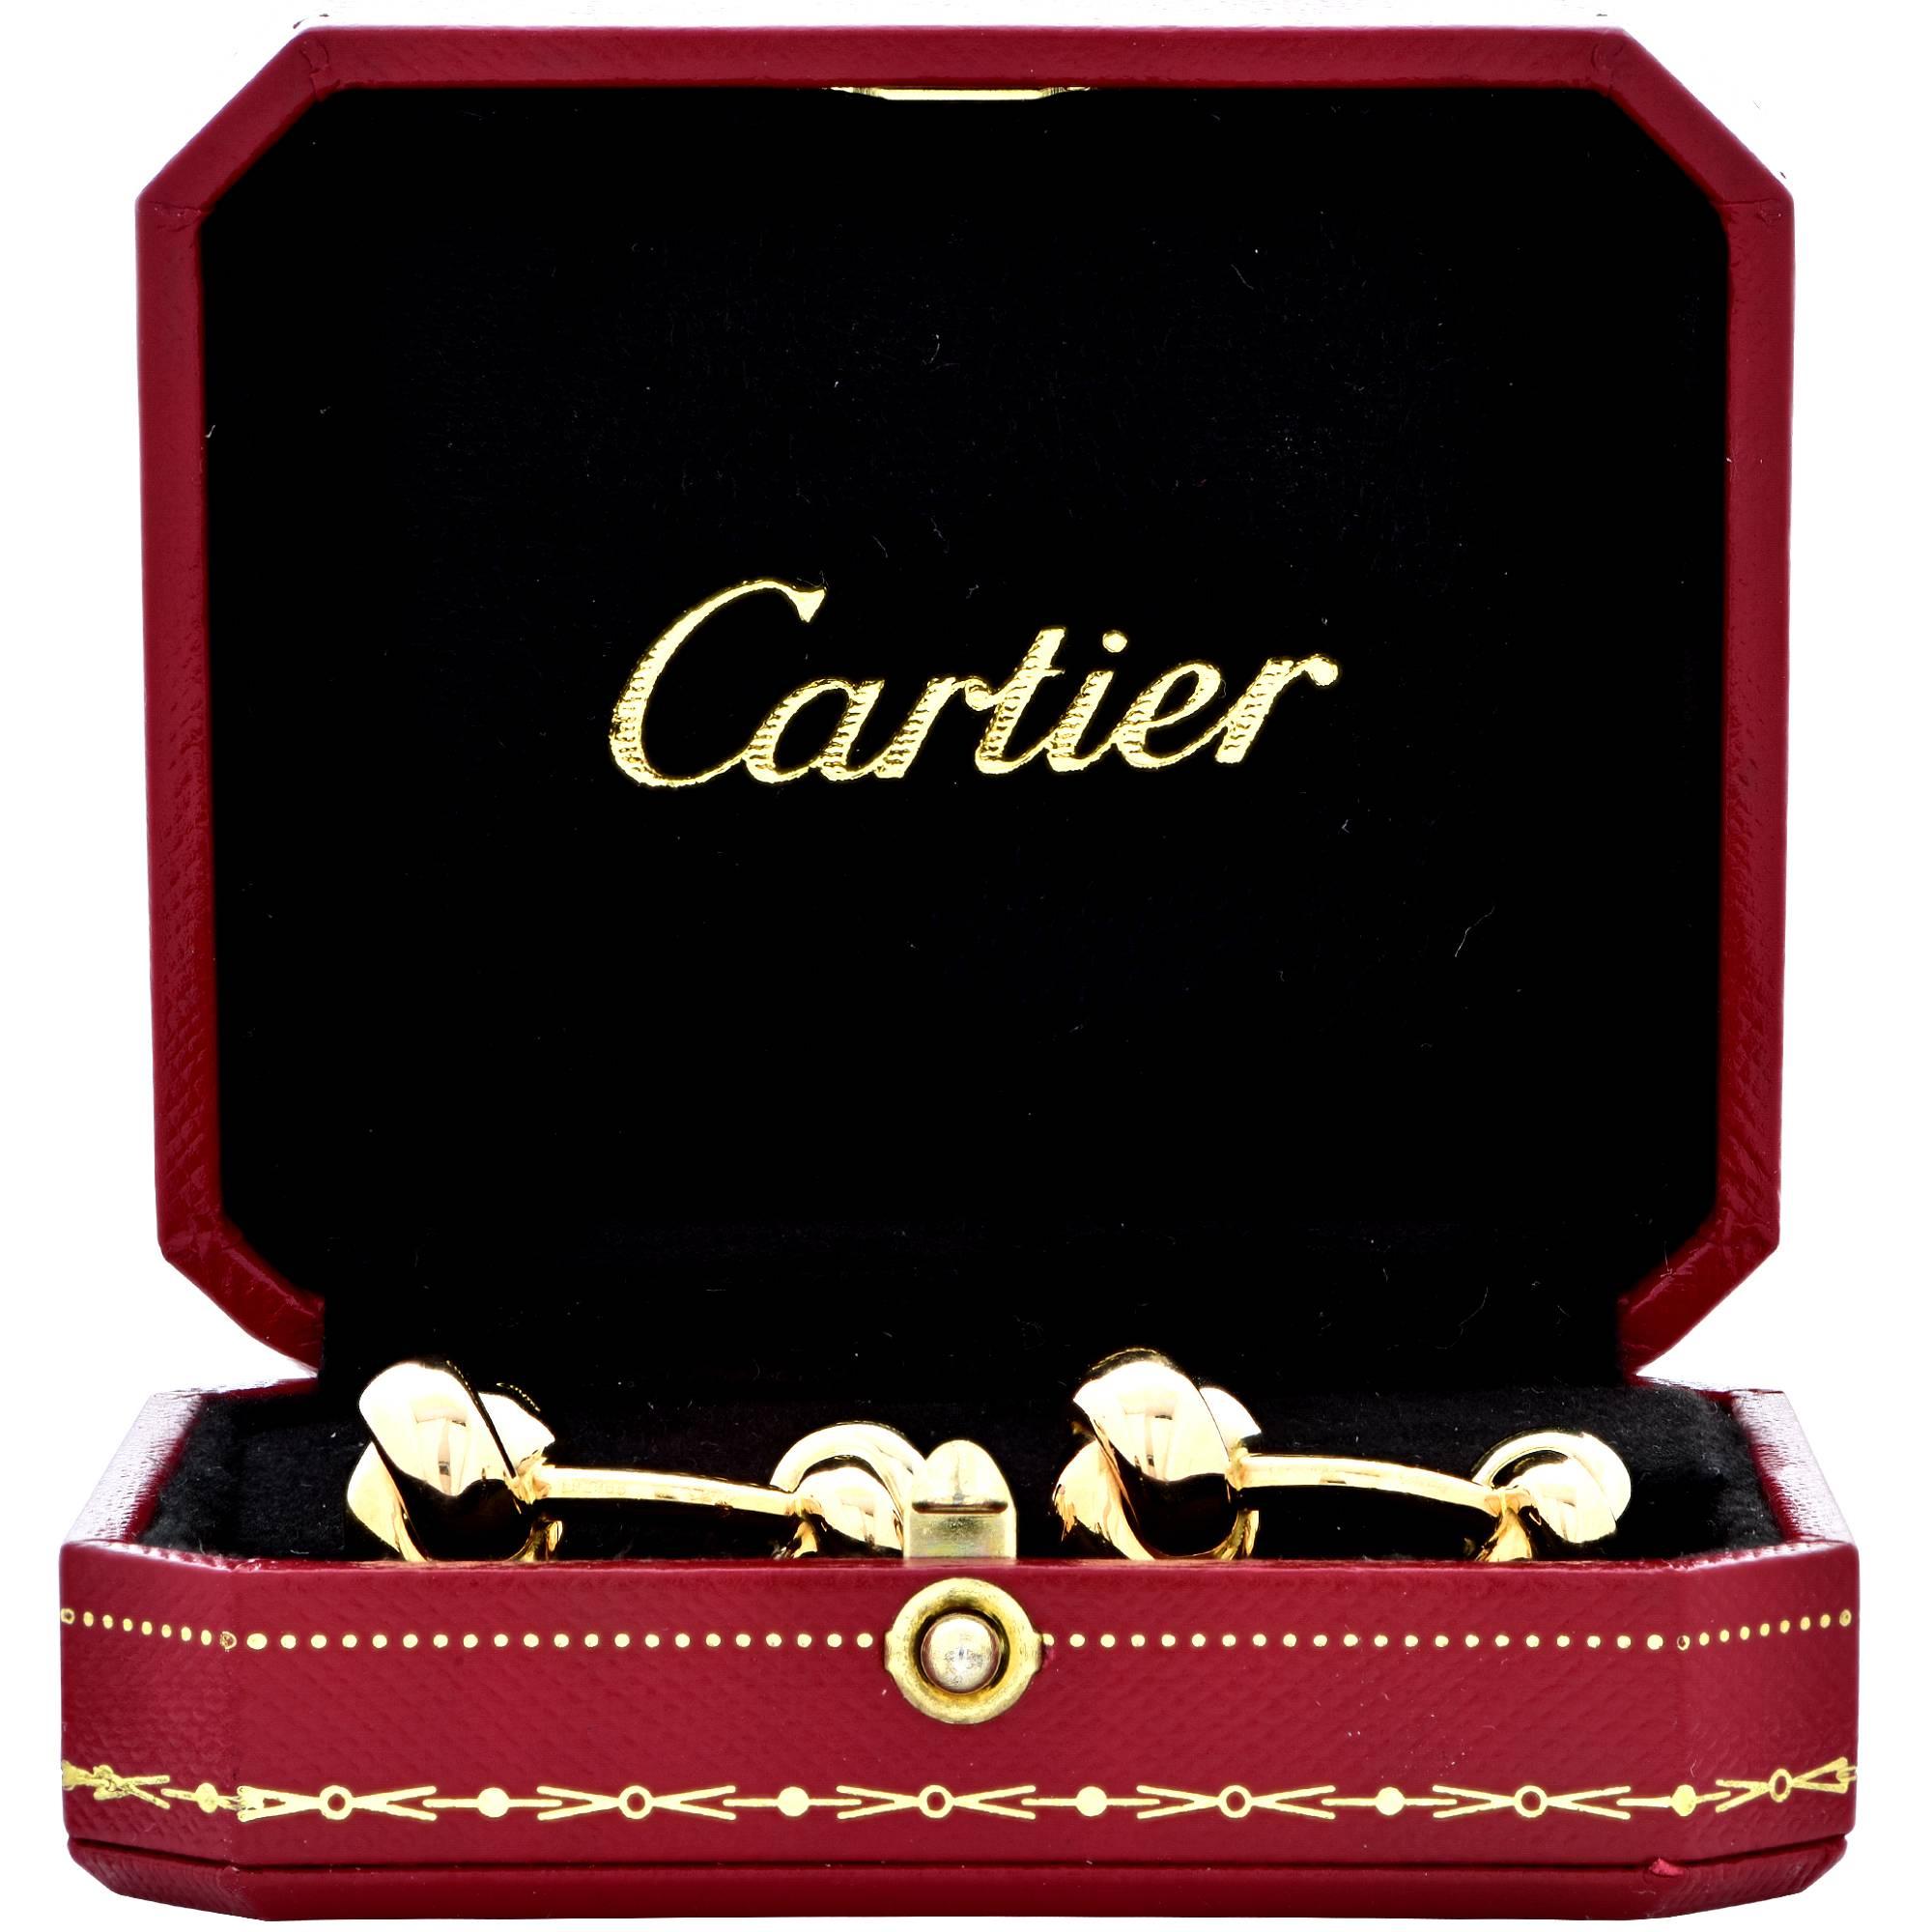 Cartier 18k yellow, white and rose gold Trinity Knot cufflinks. Cartier hallmarked and serial number on the shank is purposely covered. Cartier box is not included.

Measurements are available upon request.
It is stamped and/or tested as 18k